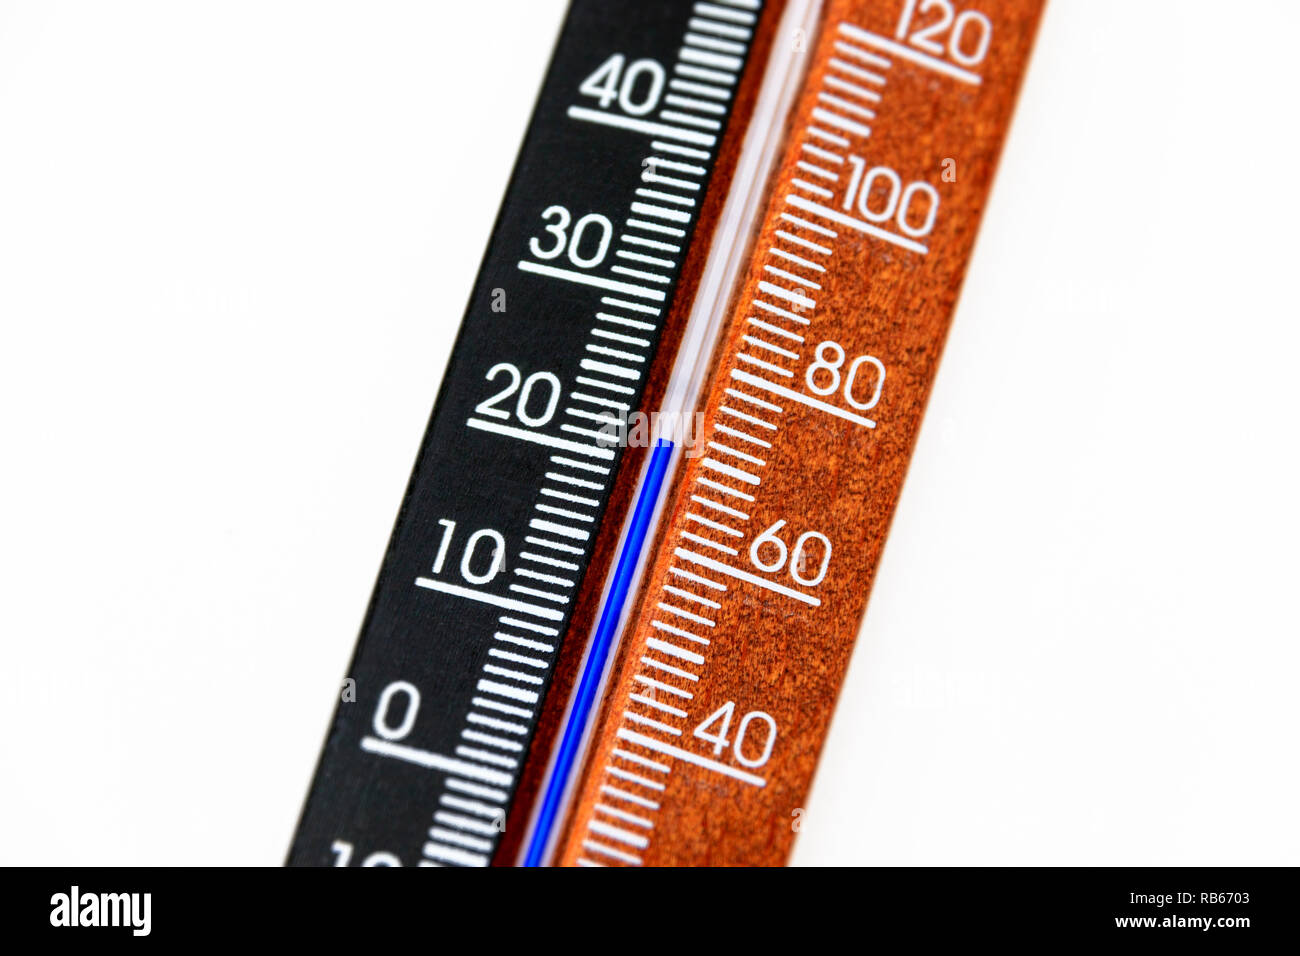 Close-up of a standard wooden room thermometer, marked in degrees Celcius and Fahrenheit, showing a temperature of 22ºC/70ºF Stock Photo